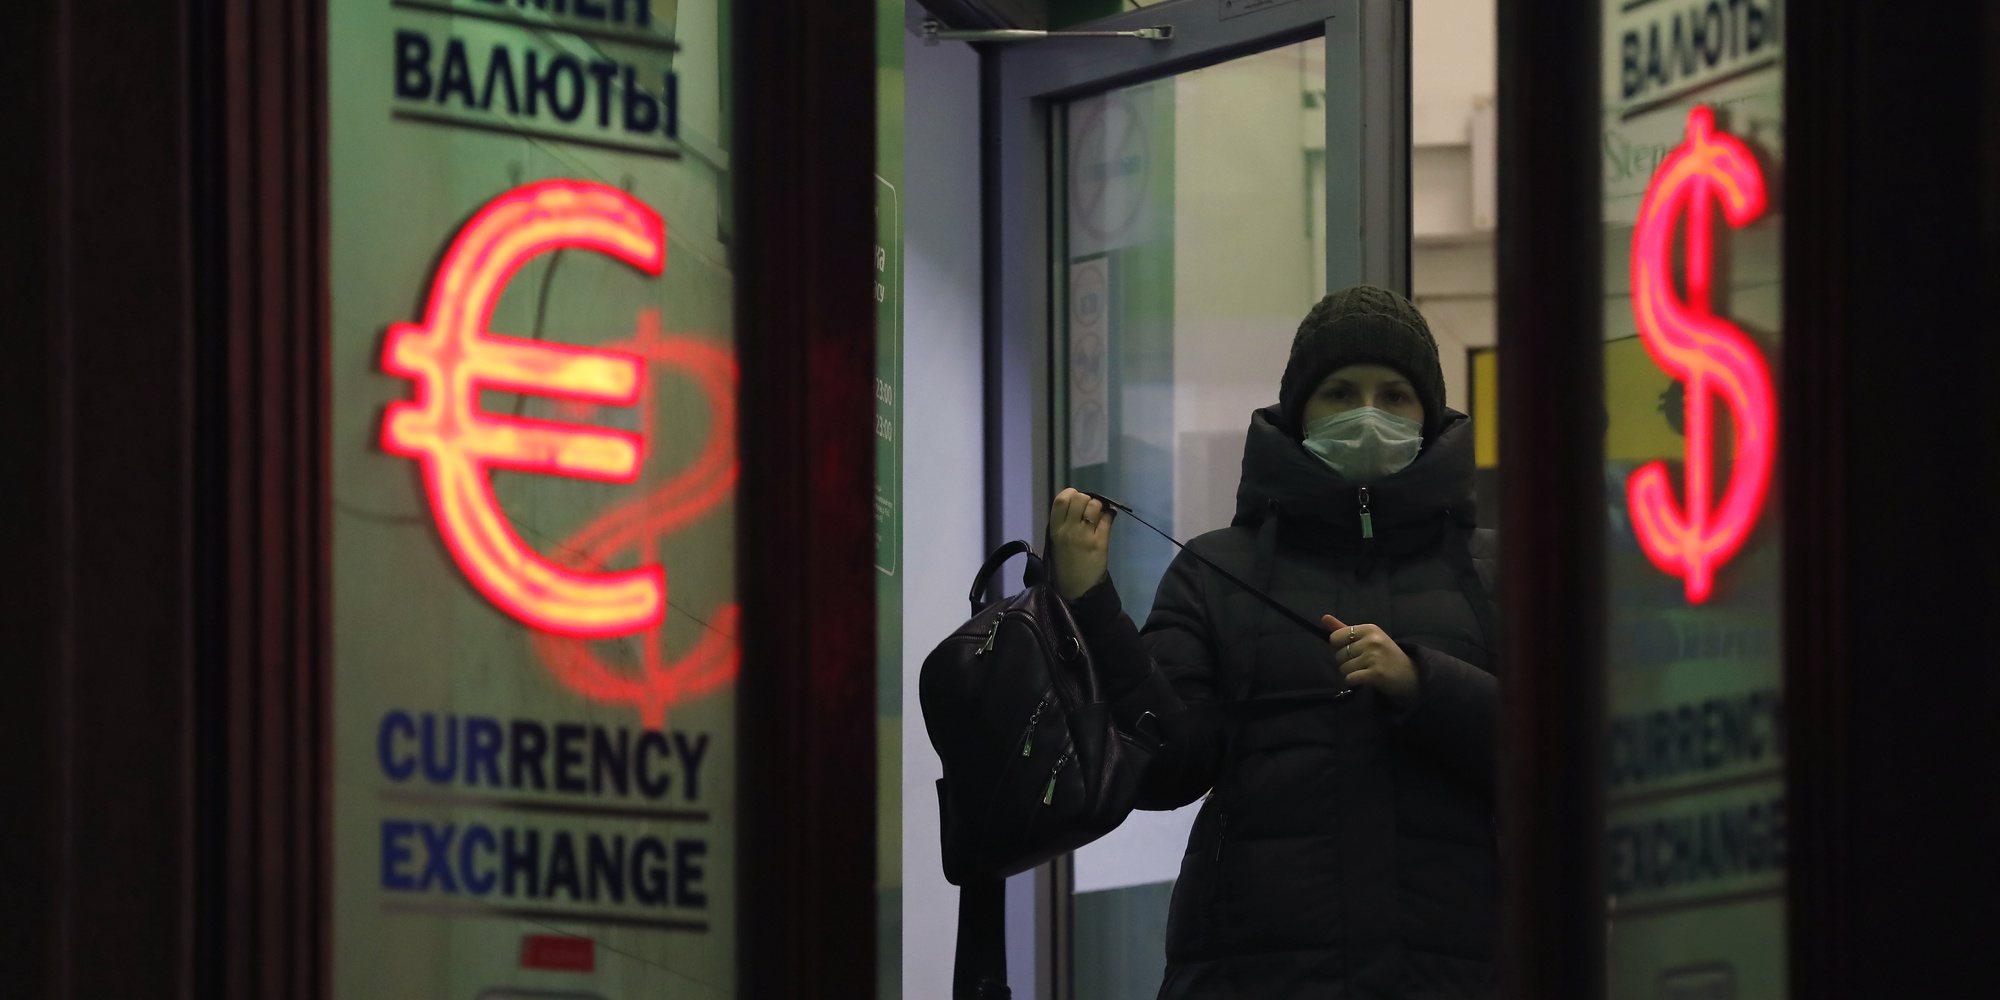 epa09785377 A woman exits between light panels displaying the euro and dollar signs at an exchange office in St. Petersburg, Russia, 25 February 2022. The dollar and the euro are confidently rising on the Moscow and St. Petersburg Exchanges, the ruble accelerated its fall against the dual-currency basket in anticipation of the announcement by Western countries of the previously announced new anti-Russian sanctions. In response to the military operation of the Russian armed forces that began in Ukraine, US authorities imposed sanctions against a number of key Russian banks. The US sanctions list includes VTB, Sberbank, Gazprombank, Sovcombank, Novikombank, Otkritie Bank, Alfa-Bank and Credit Bank of Moscow.  EPA/ANATOLY MALTSEV